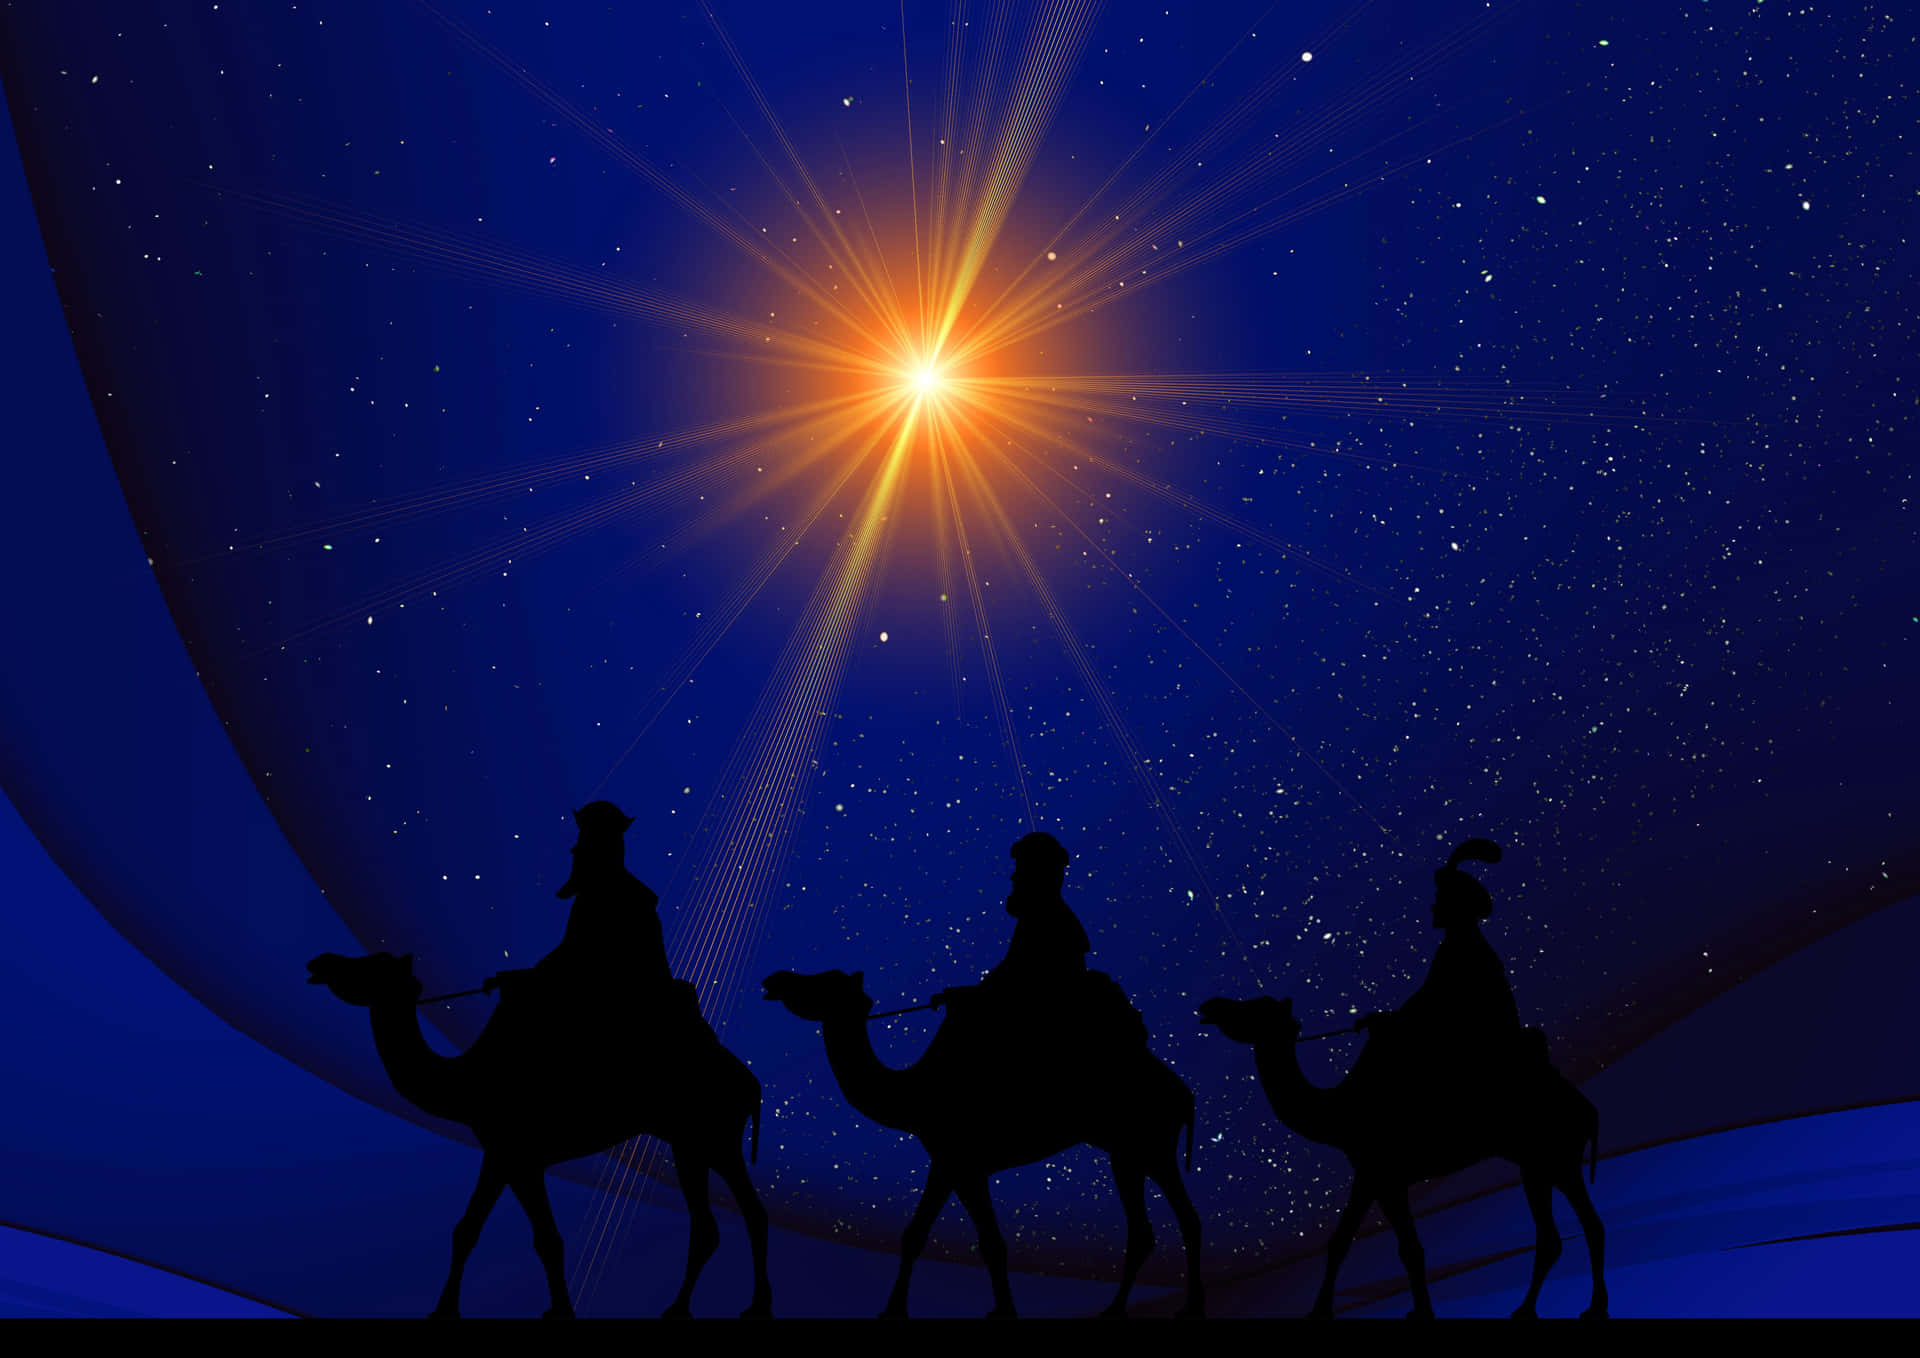 A peaceful depiction of Jesus Christ's birth in the holy city of Bethlehem. Wallpaper